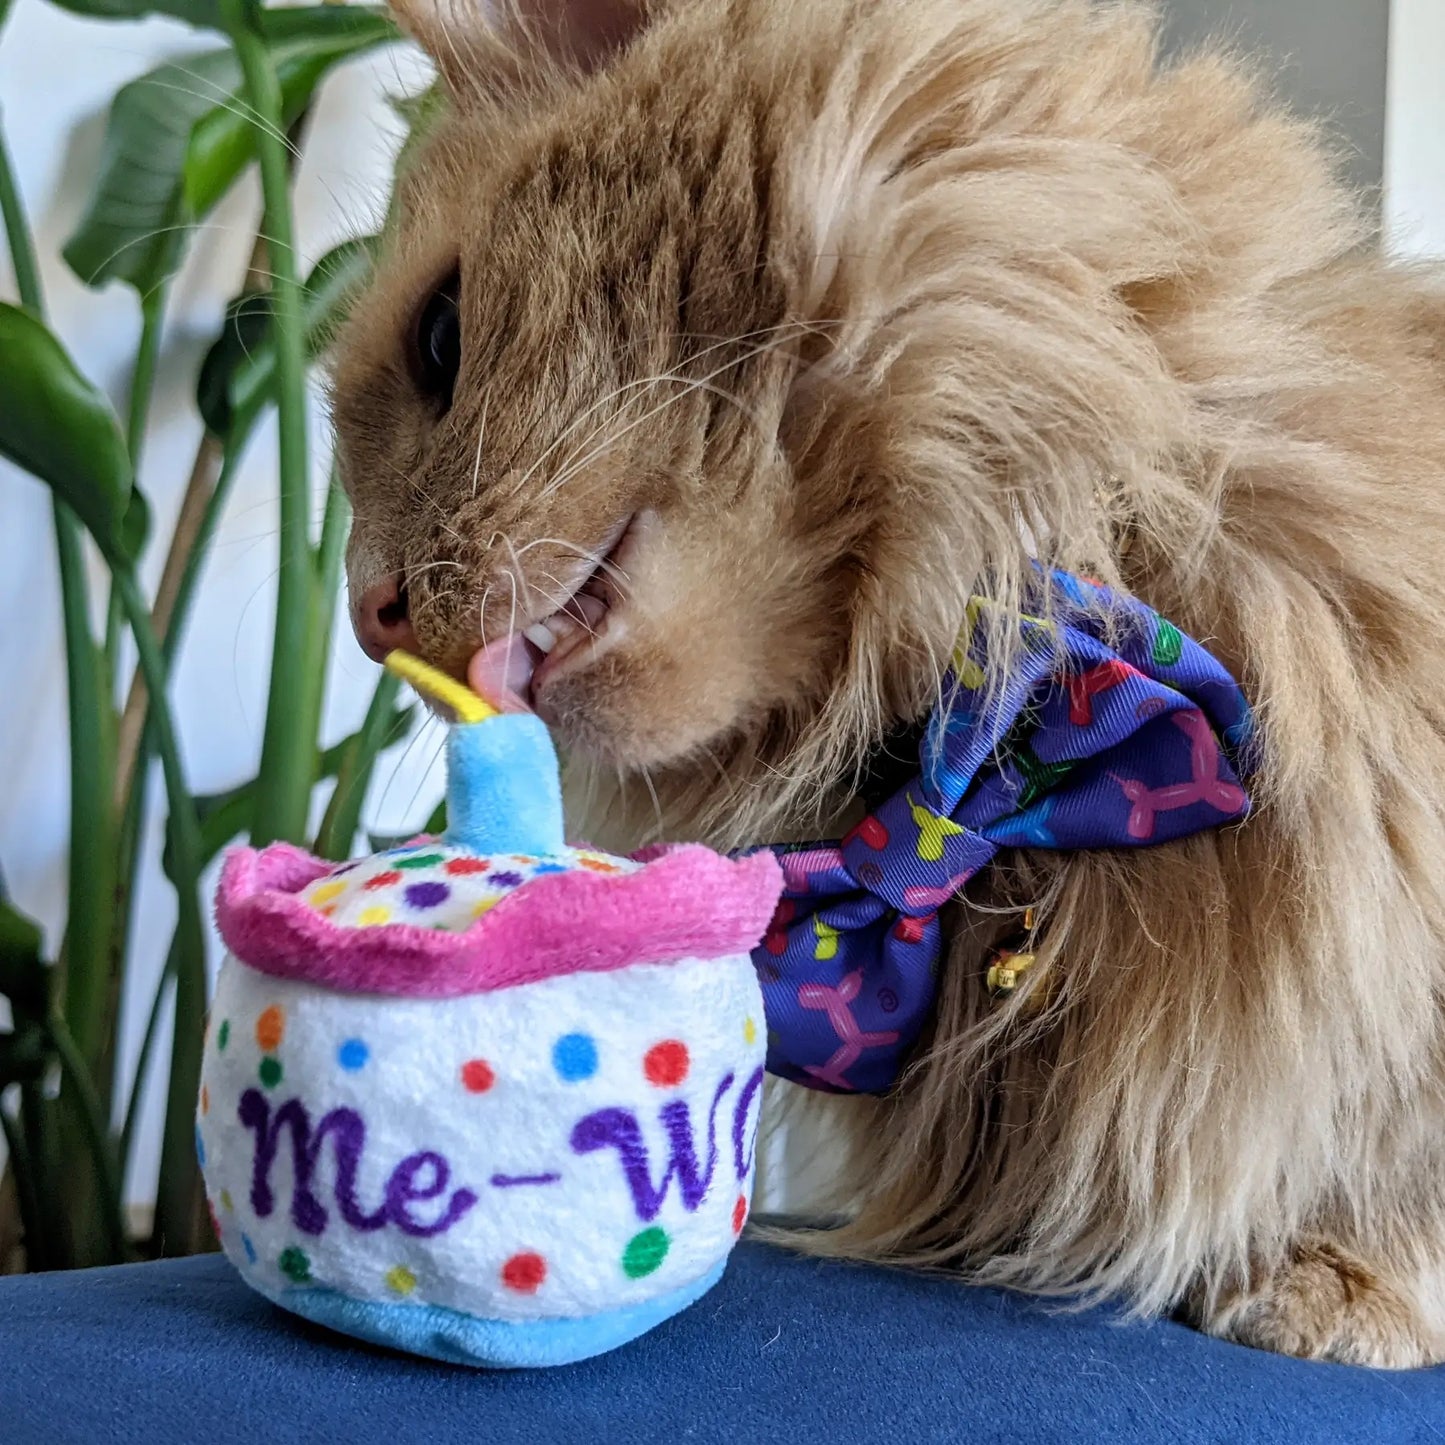 Mewow Cake Catnip Toy for Cats